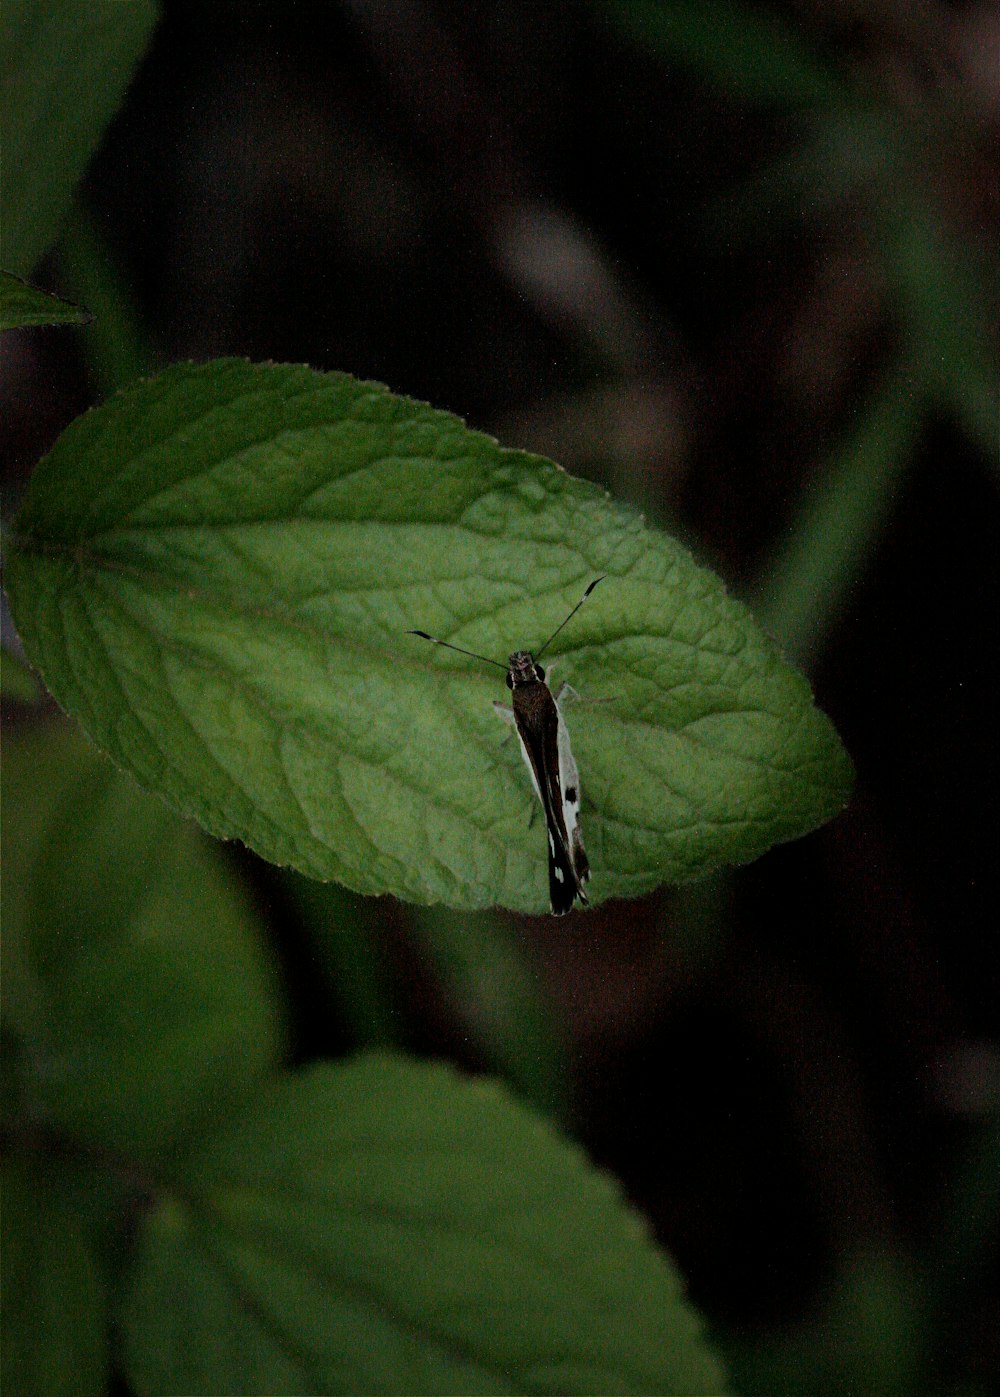 a black and white insect on a green leaf